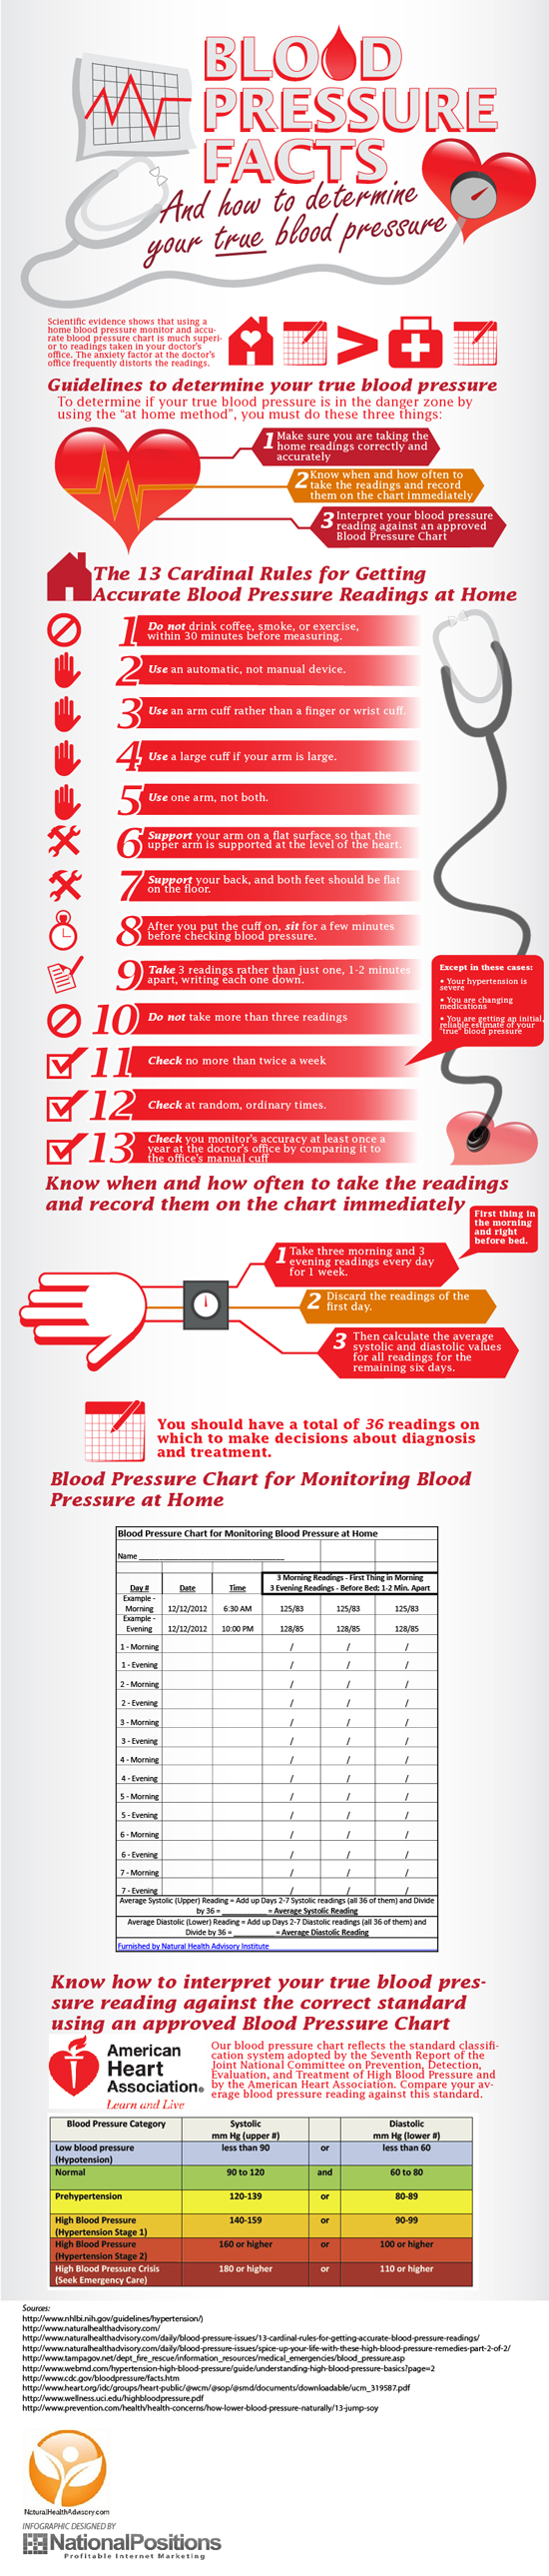 Blood Pressure Chart Infographic – How to Determine Your True Blood Pressure